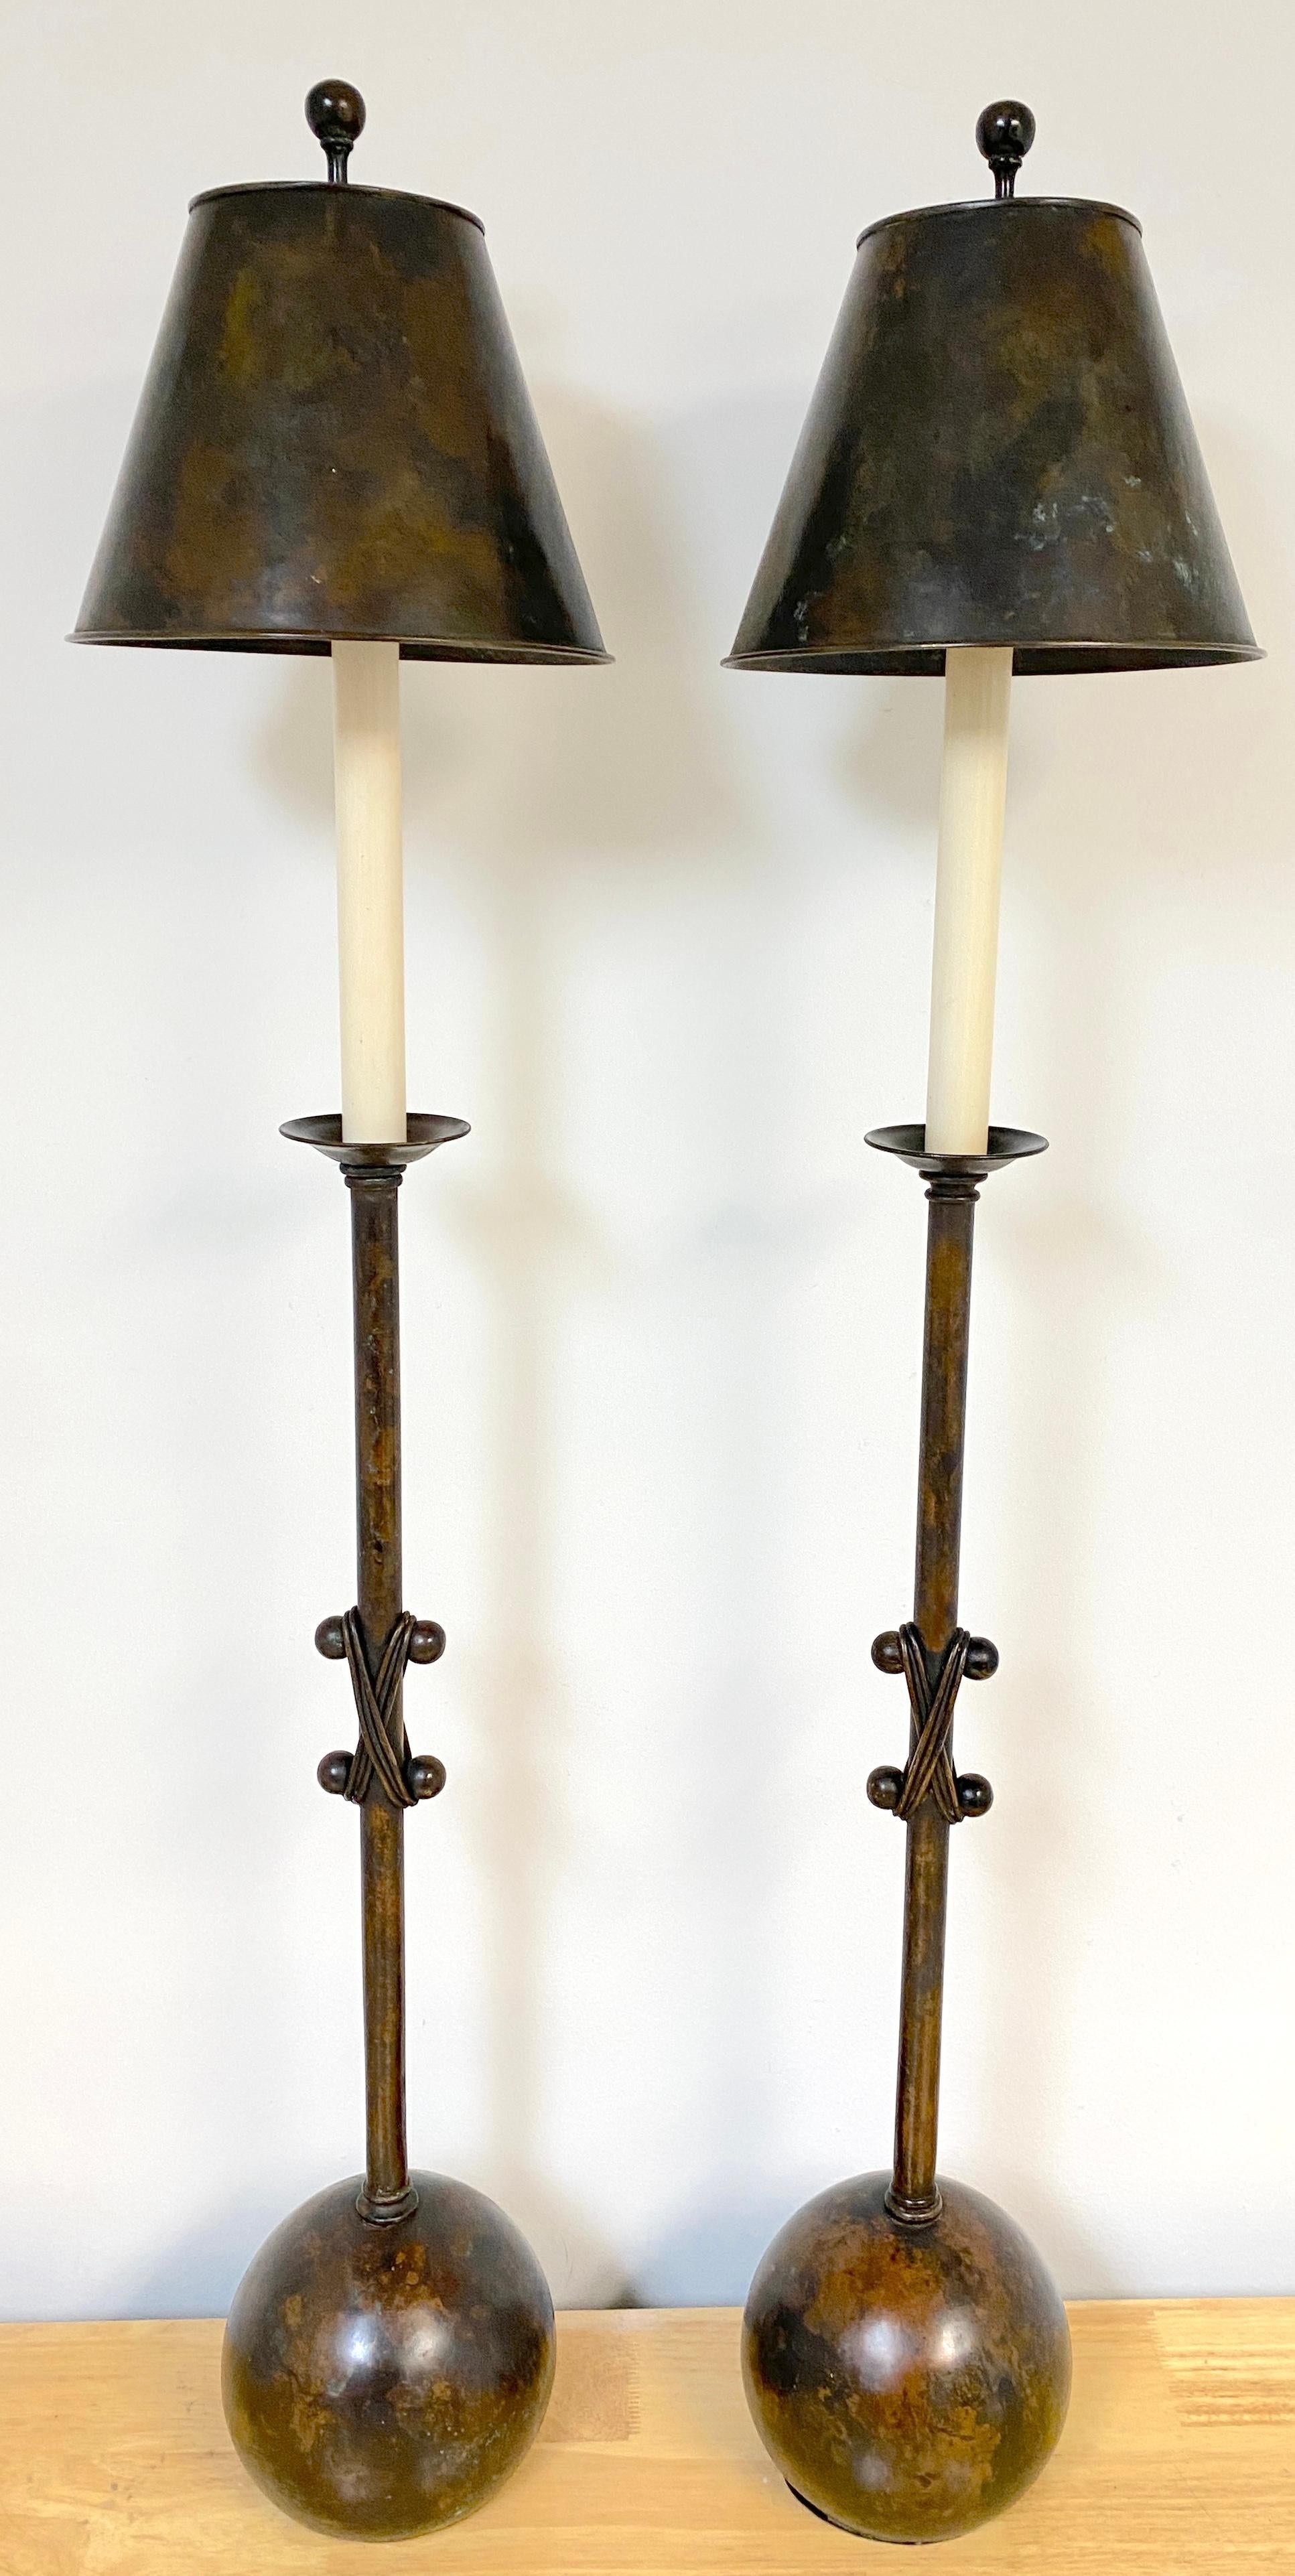 Pair of 20th Century French Modern Patinated Bronze Sculptural Lamps 
France, Later 20th Century 

A Pair of 20th Century French Modern Patinated Bronze Sculptural Lamps, made in France in the later 20th century. These lamps, standing at an